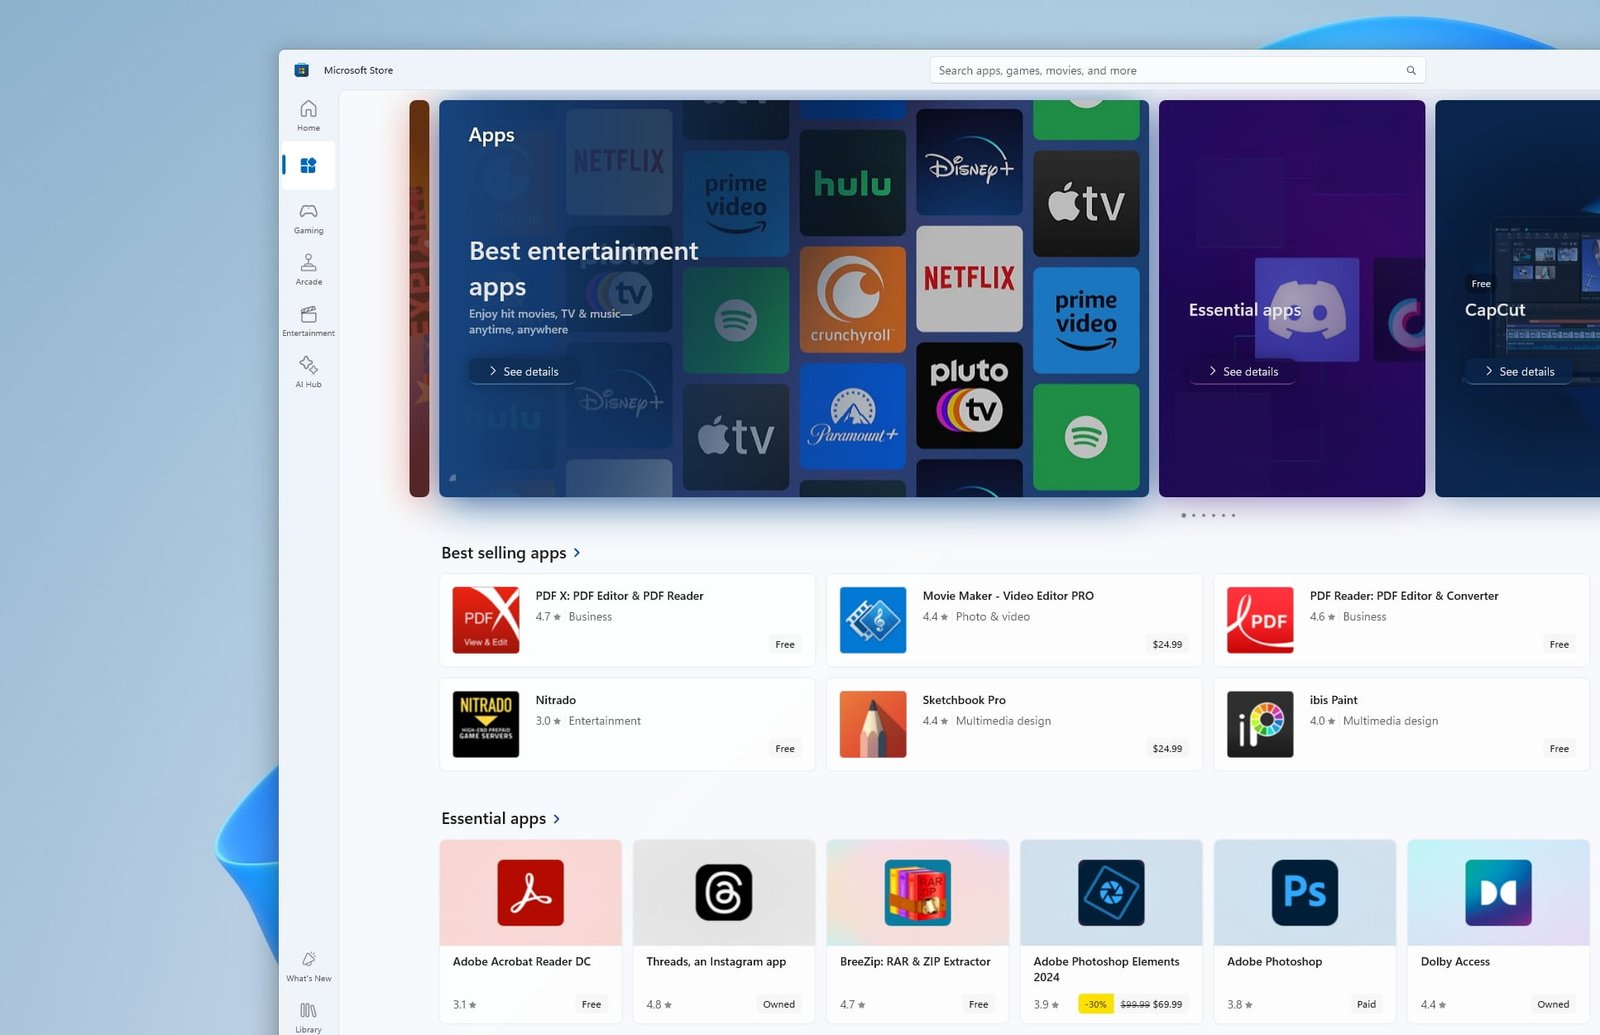 Microsoft Store - Apps Section